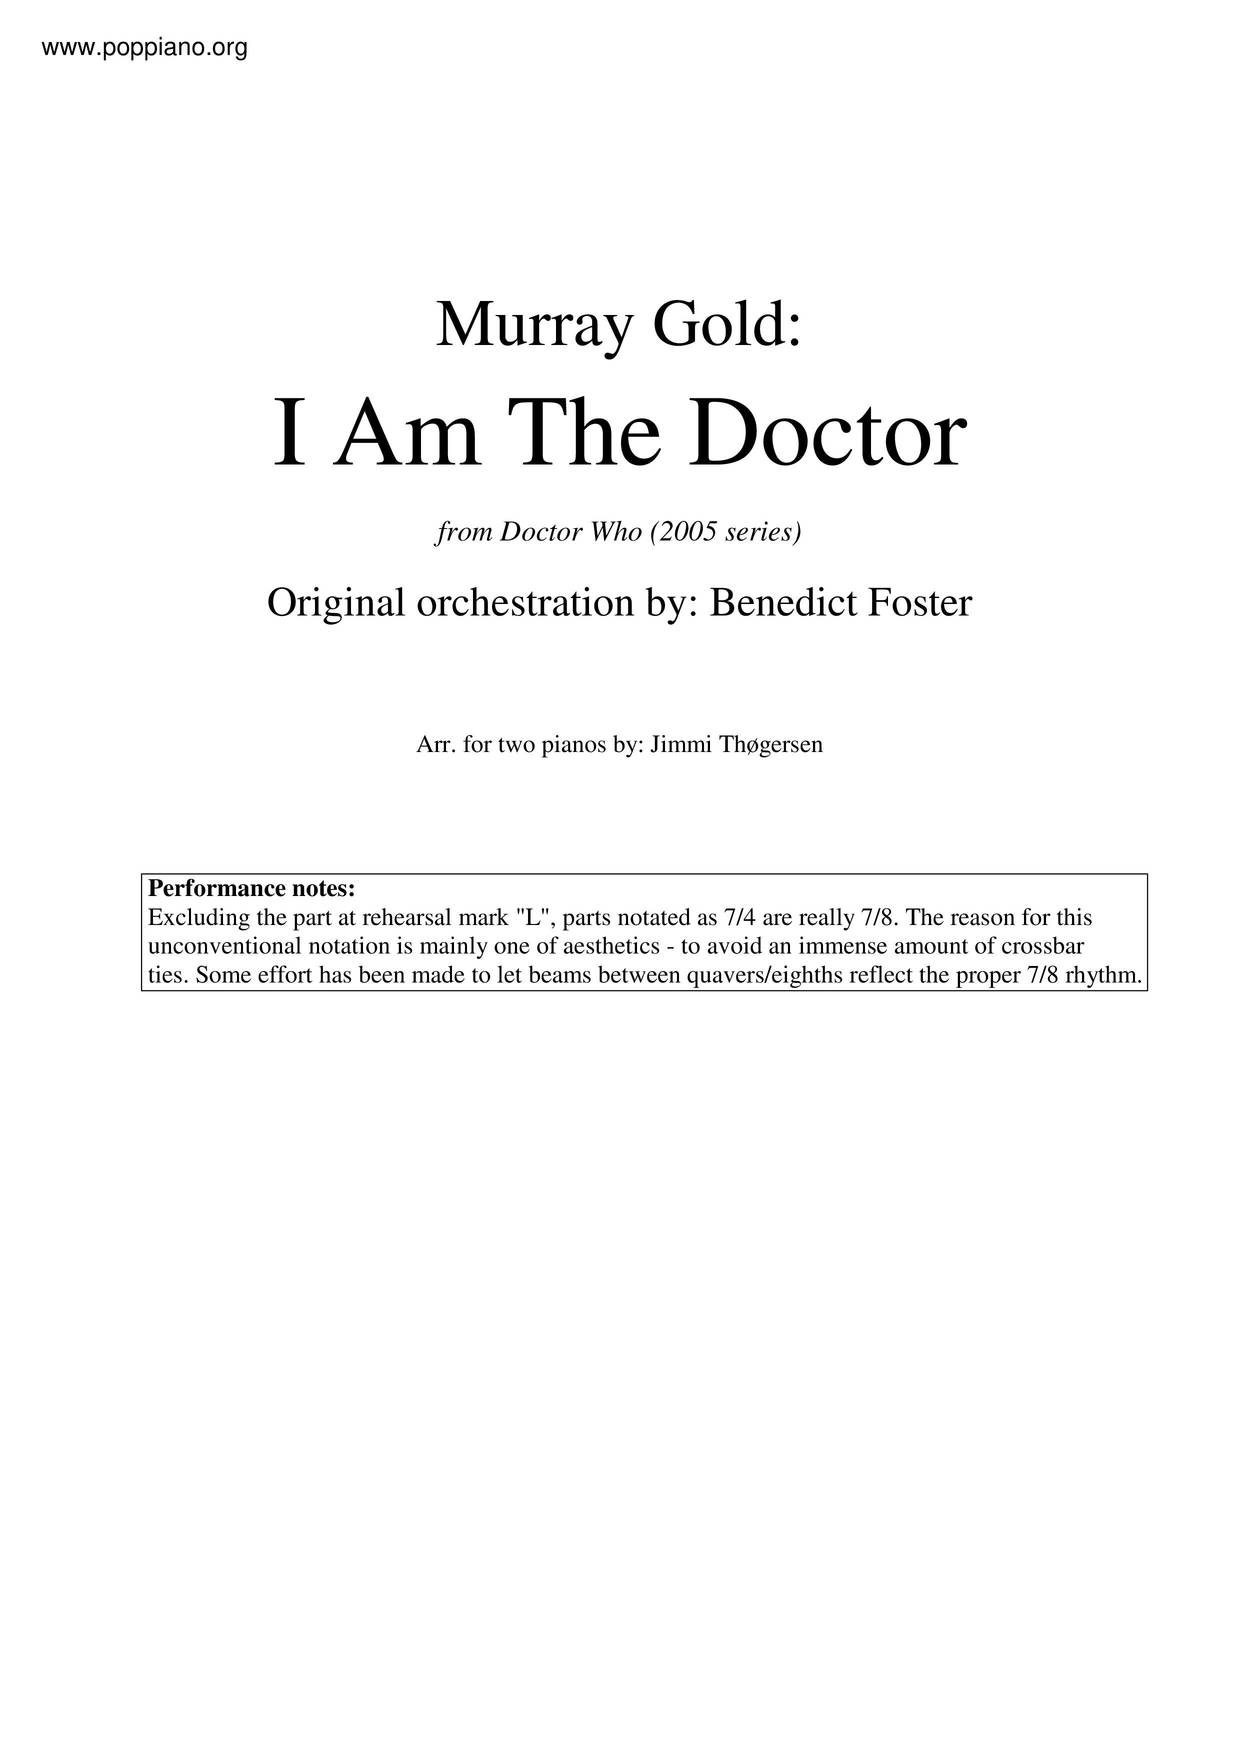 Doctor Who - I Am The Doctor Score